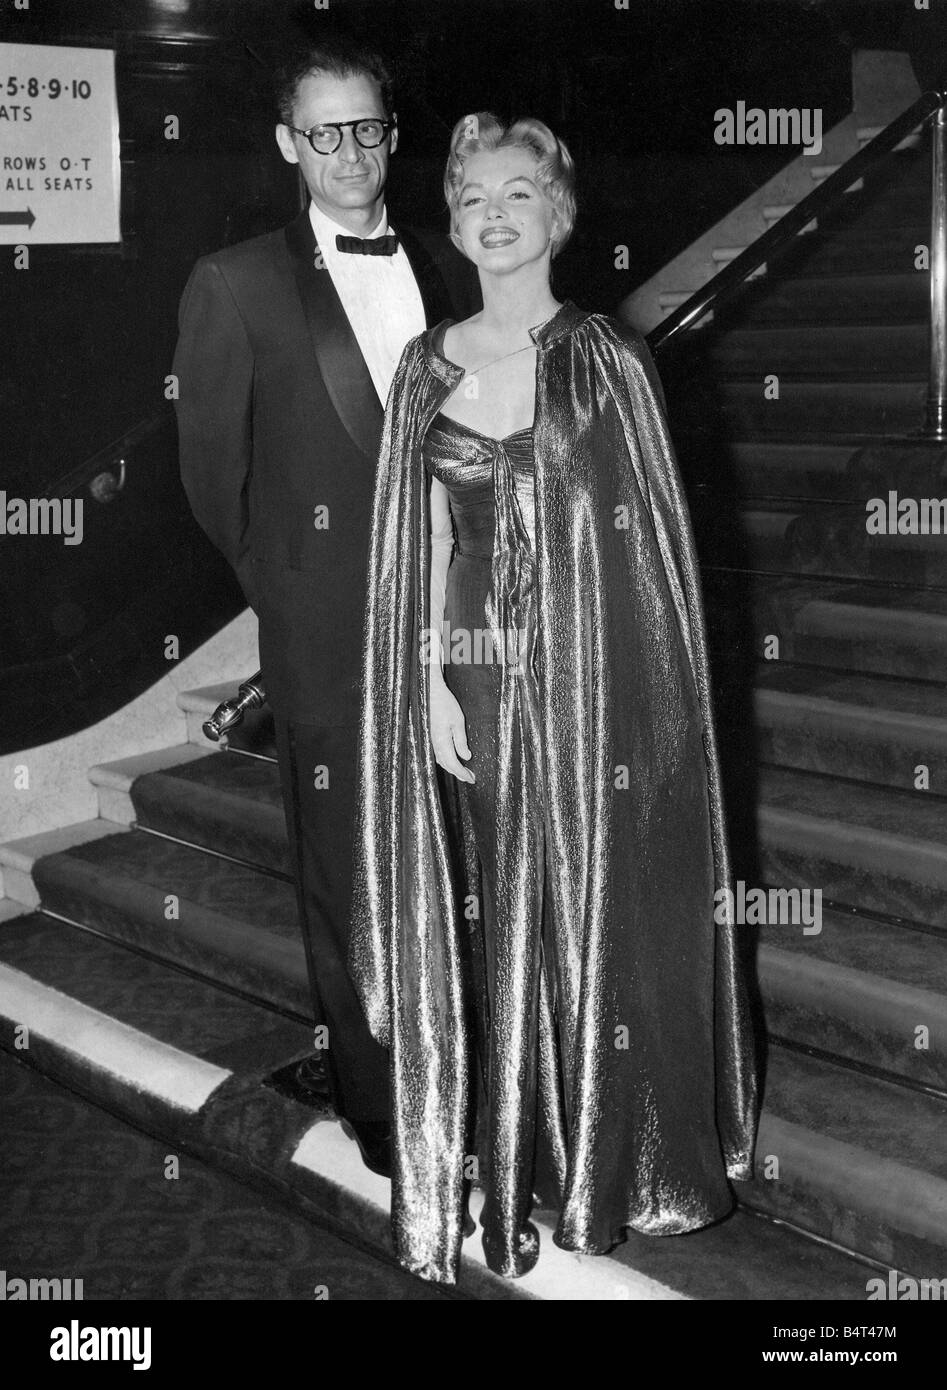 Actress Marilyn Monroe pictured with her playwright husband Arthur Miller arriving at the Empire Theatre Leicester Square for the Royal Film Performance of the British film The Battle of the River Plate 29 10 56 Stock Photo